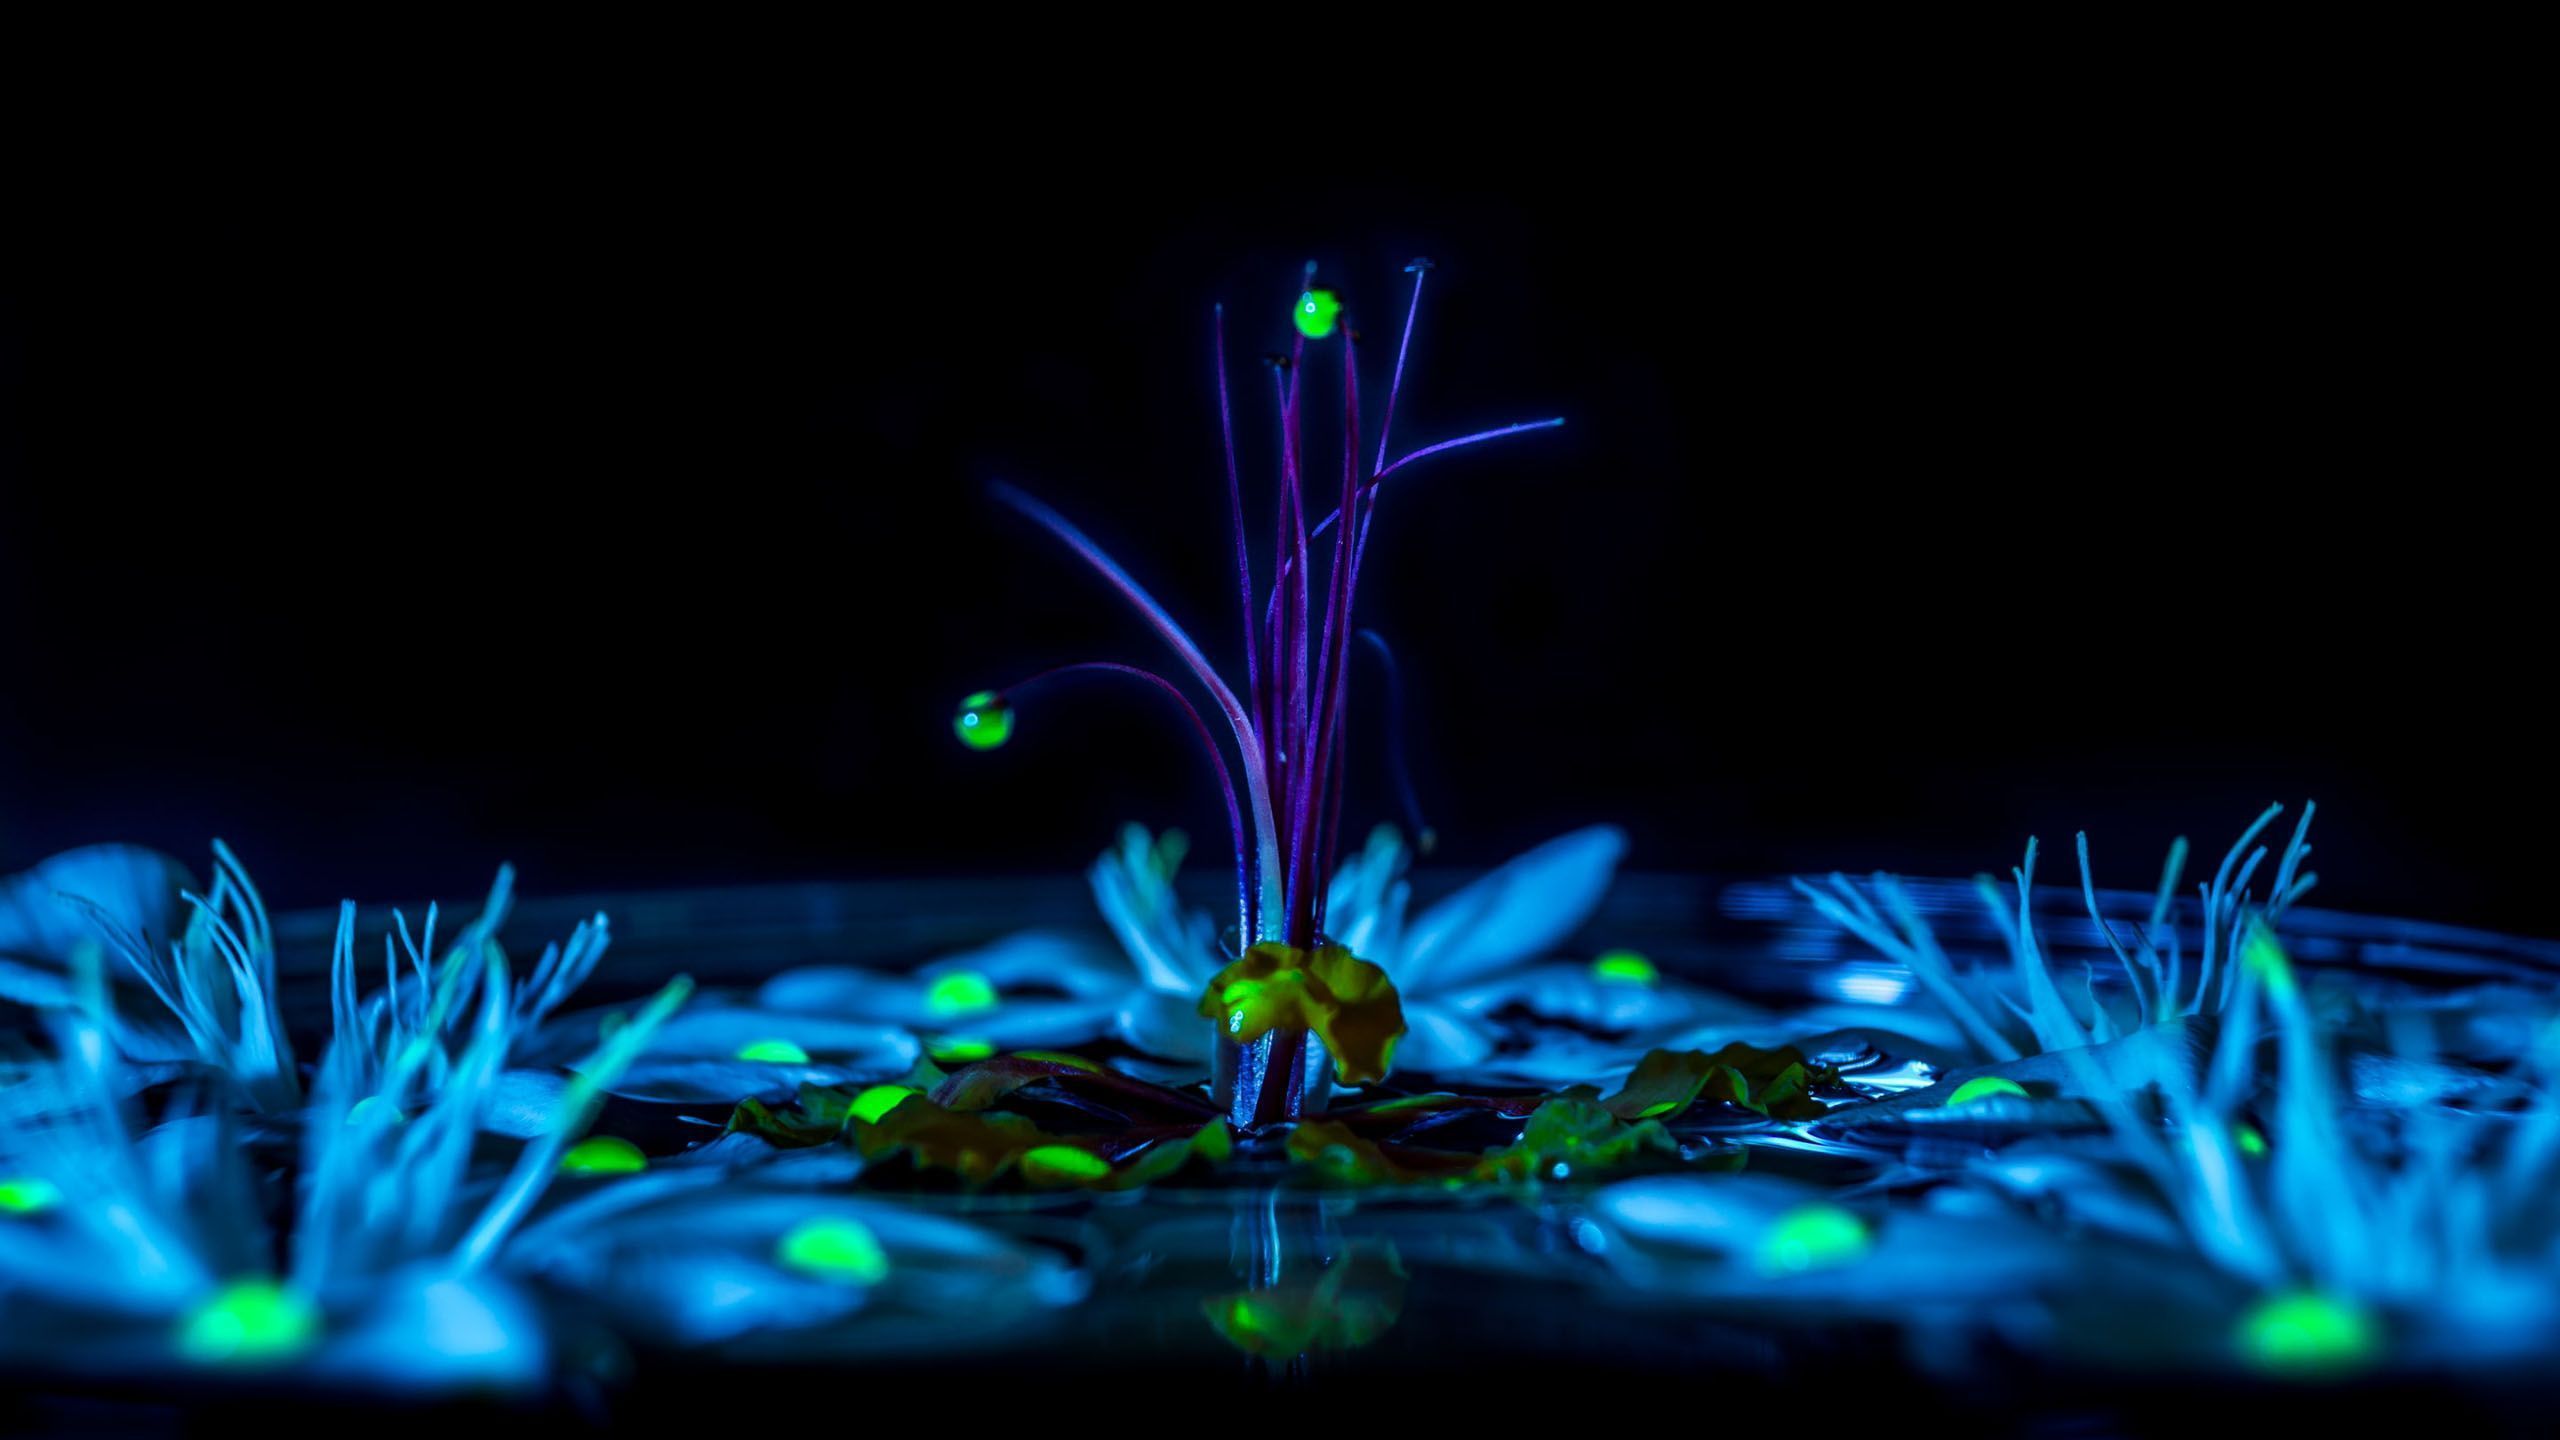 A group of small glowing plants in the dark. - Psychedelic